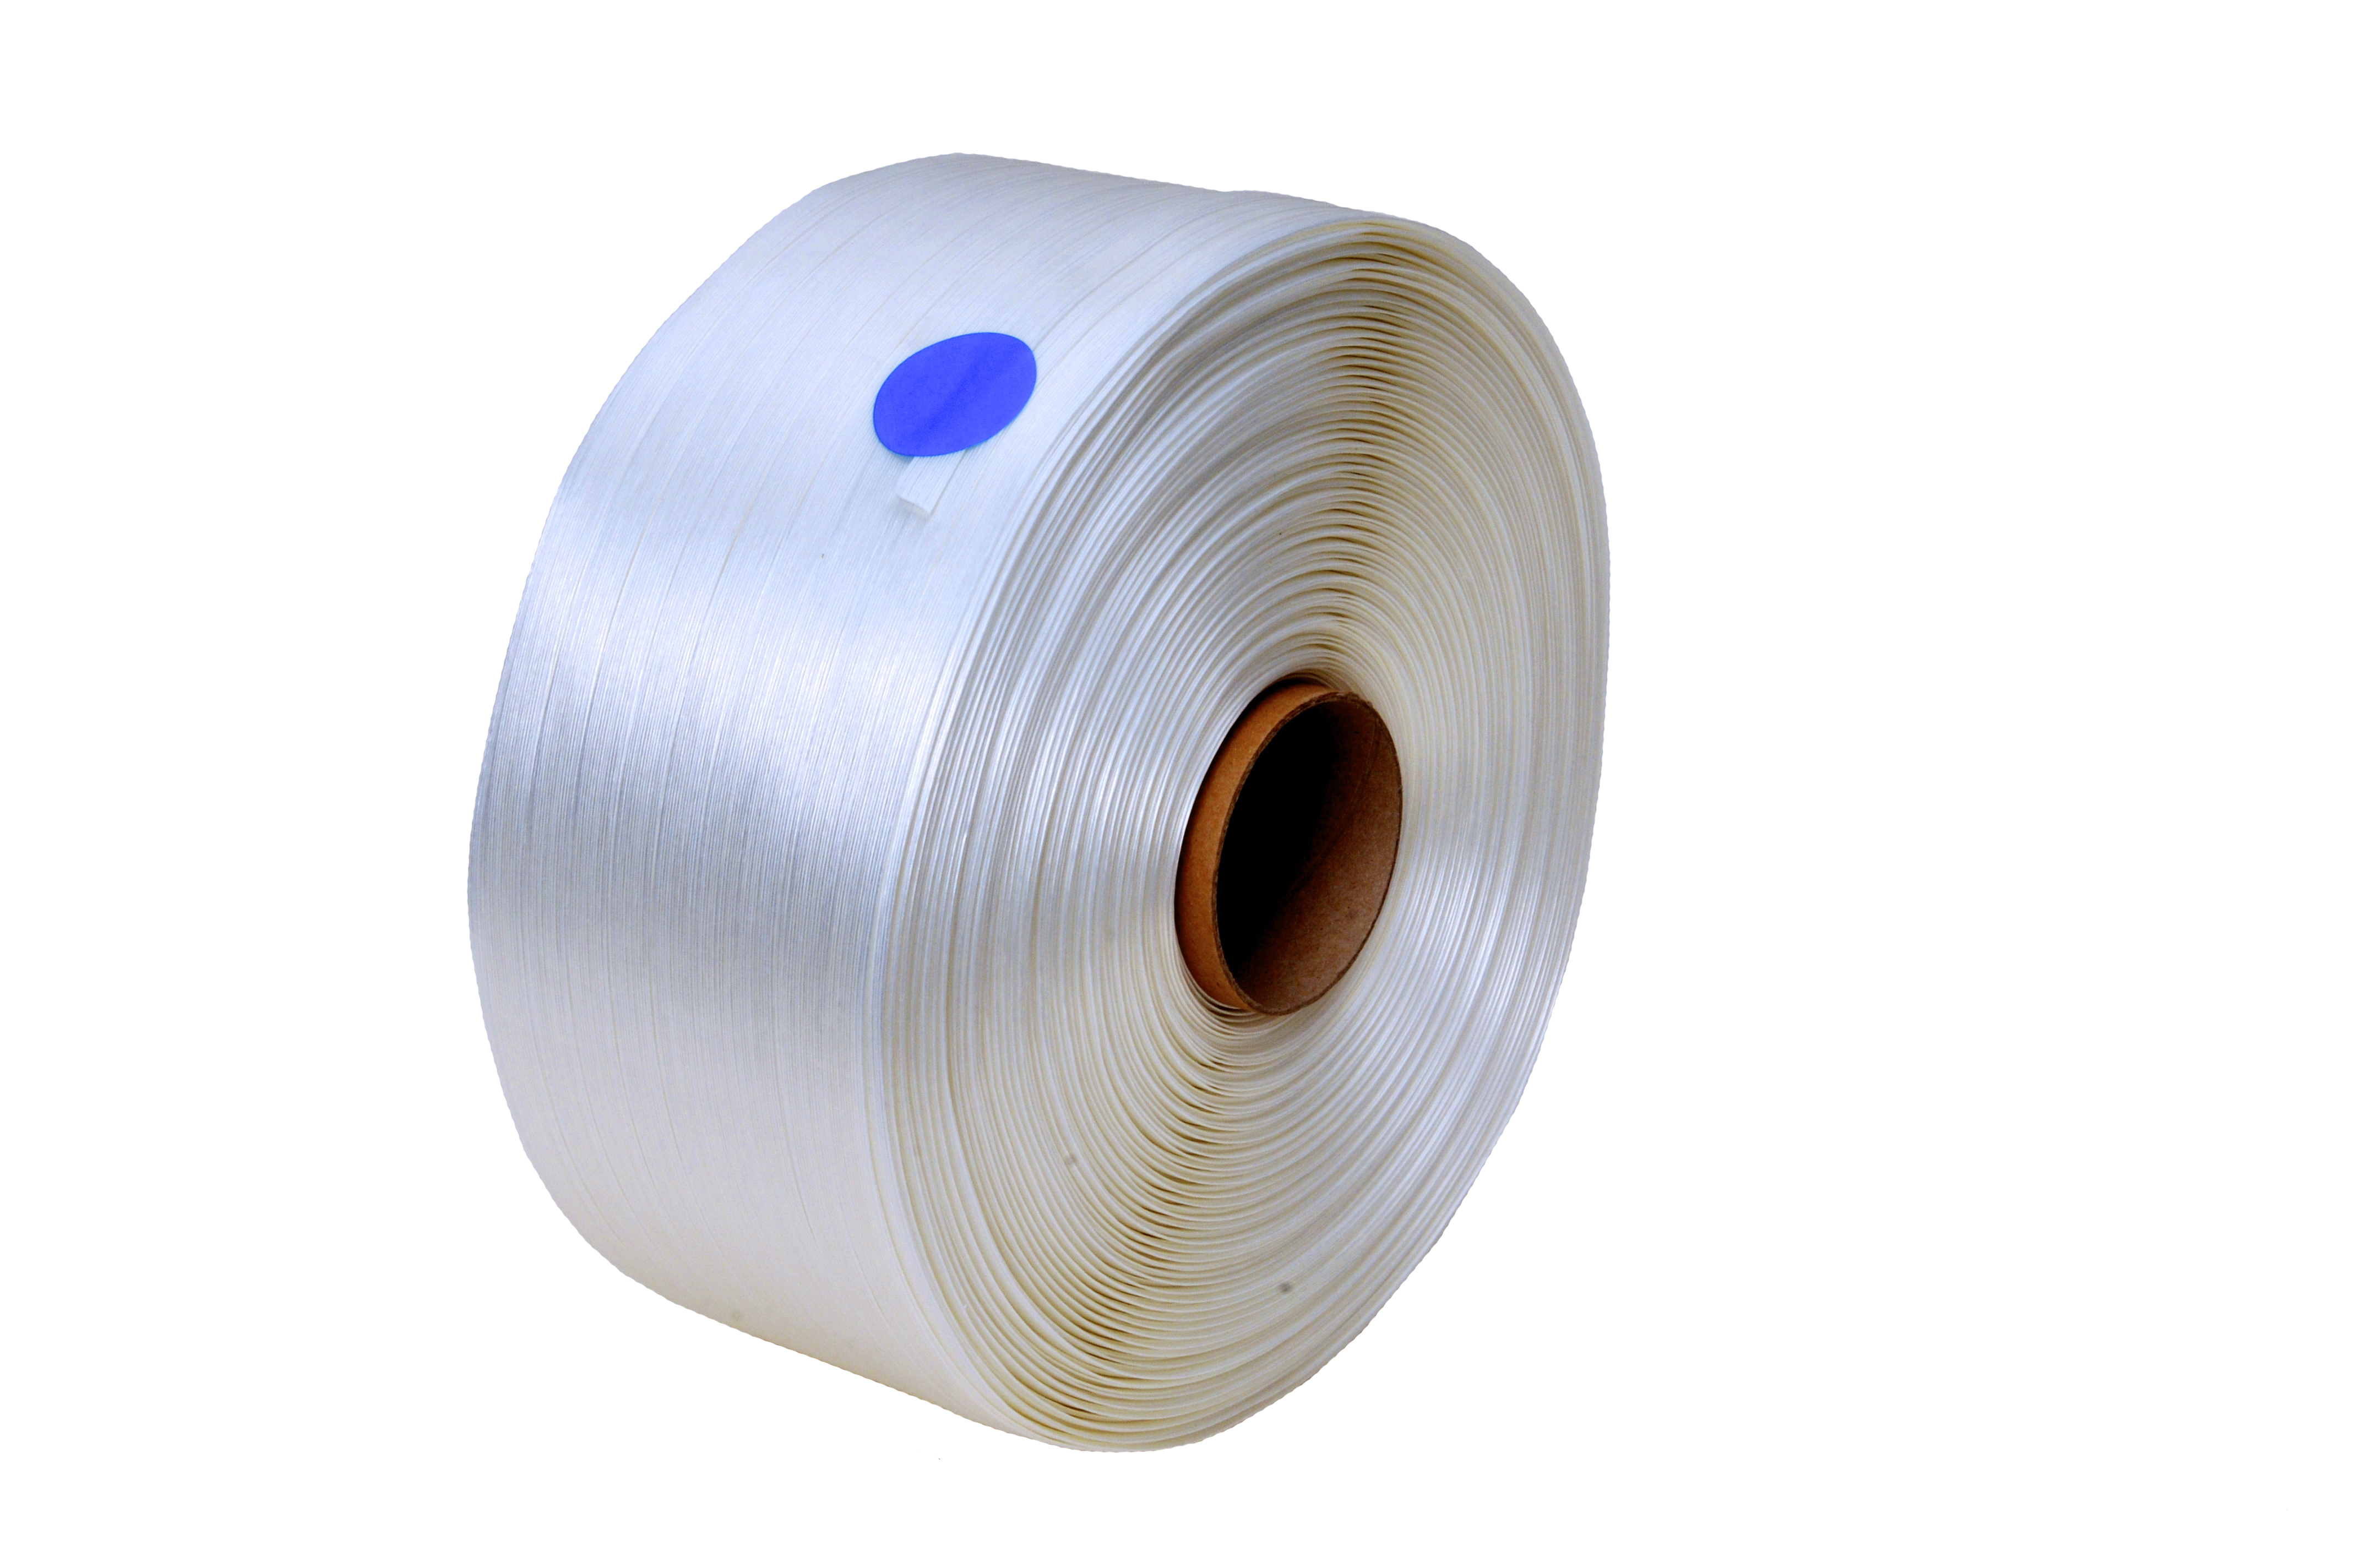  WG-band WG-16mmx850m/rulle -450kg 2/fp 80/pall